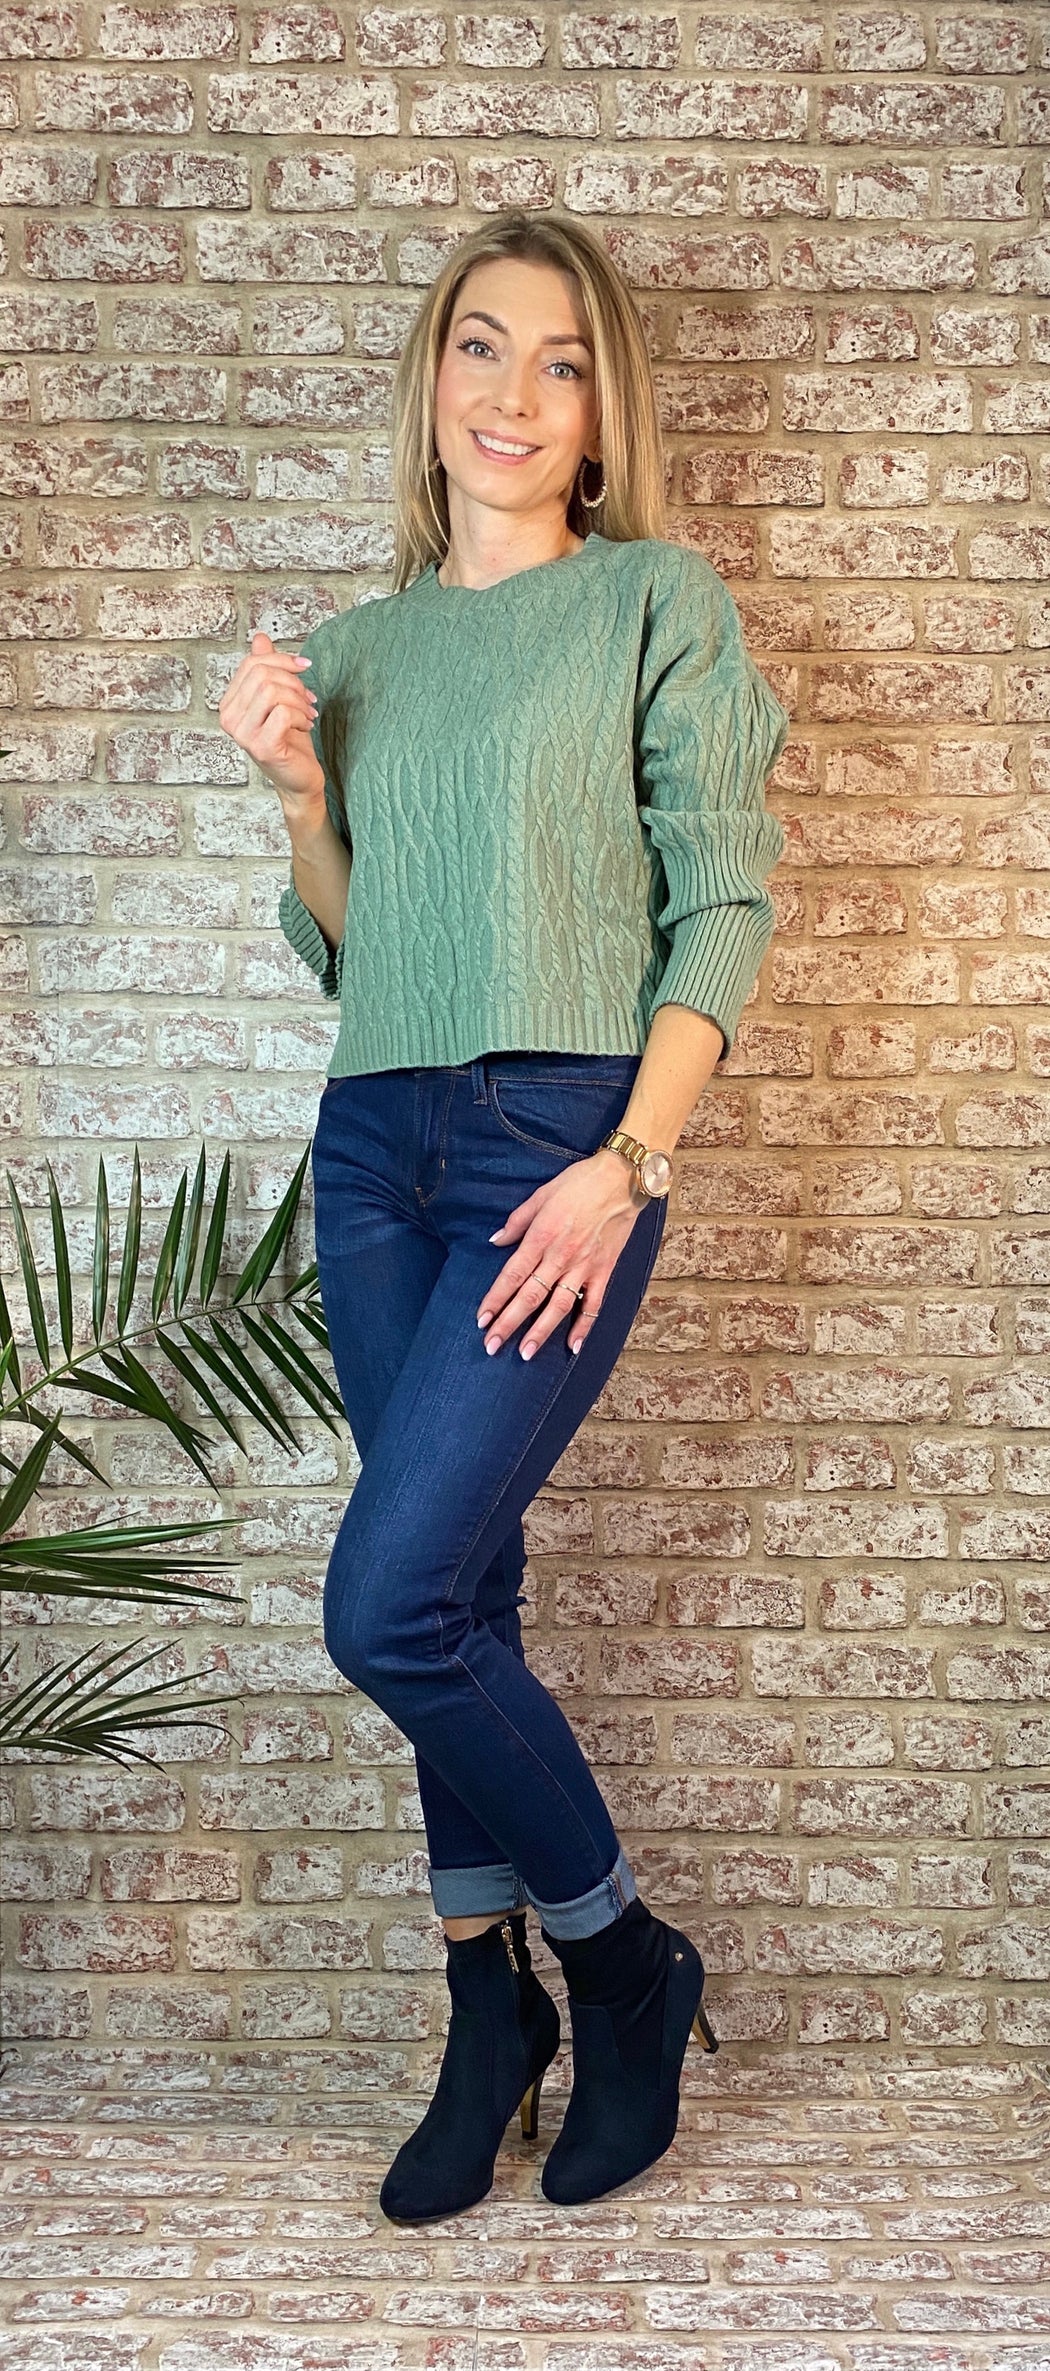 Mabuin duck egg blue cable knit